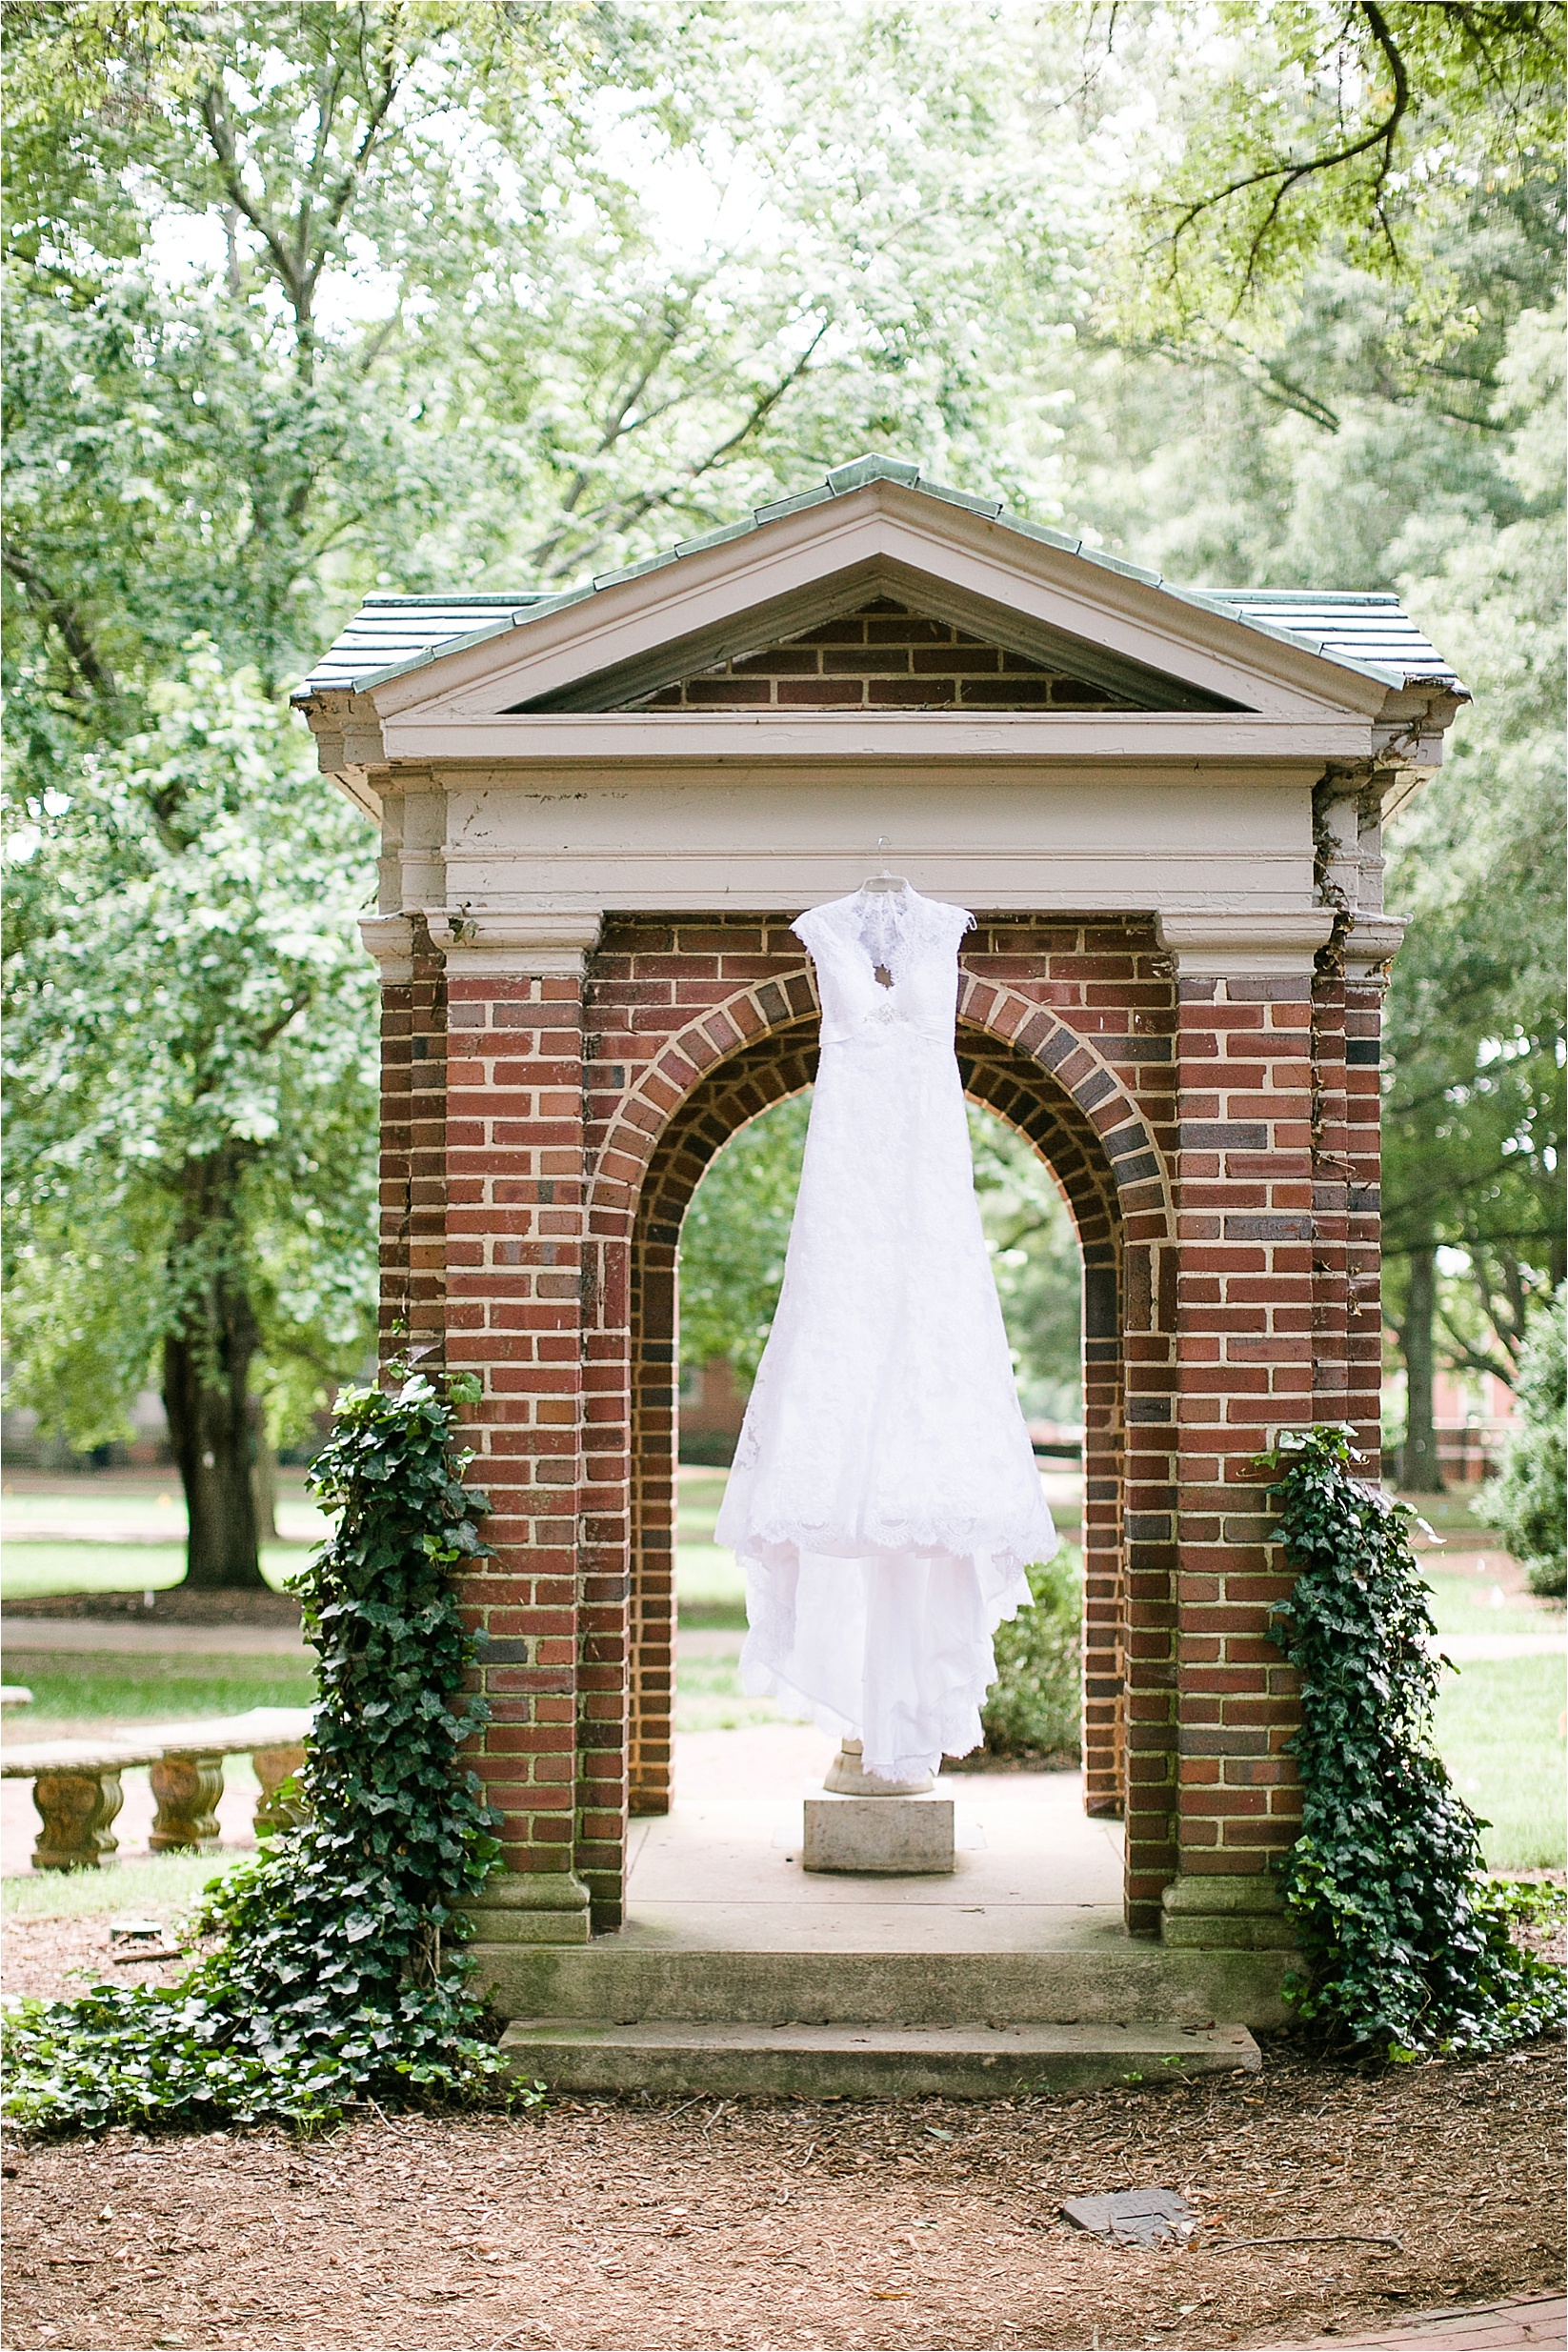 Dress hanging on the fountain at the davidson college chapel wedding in Davidson north Carolina and the Charles mack citizen center wedding and reception